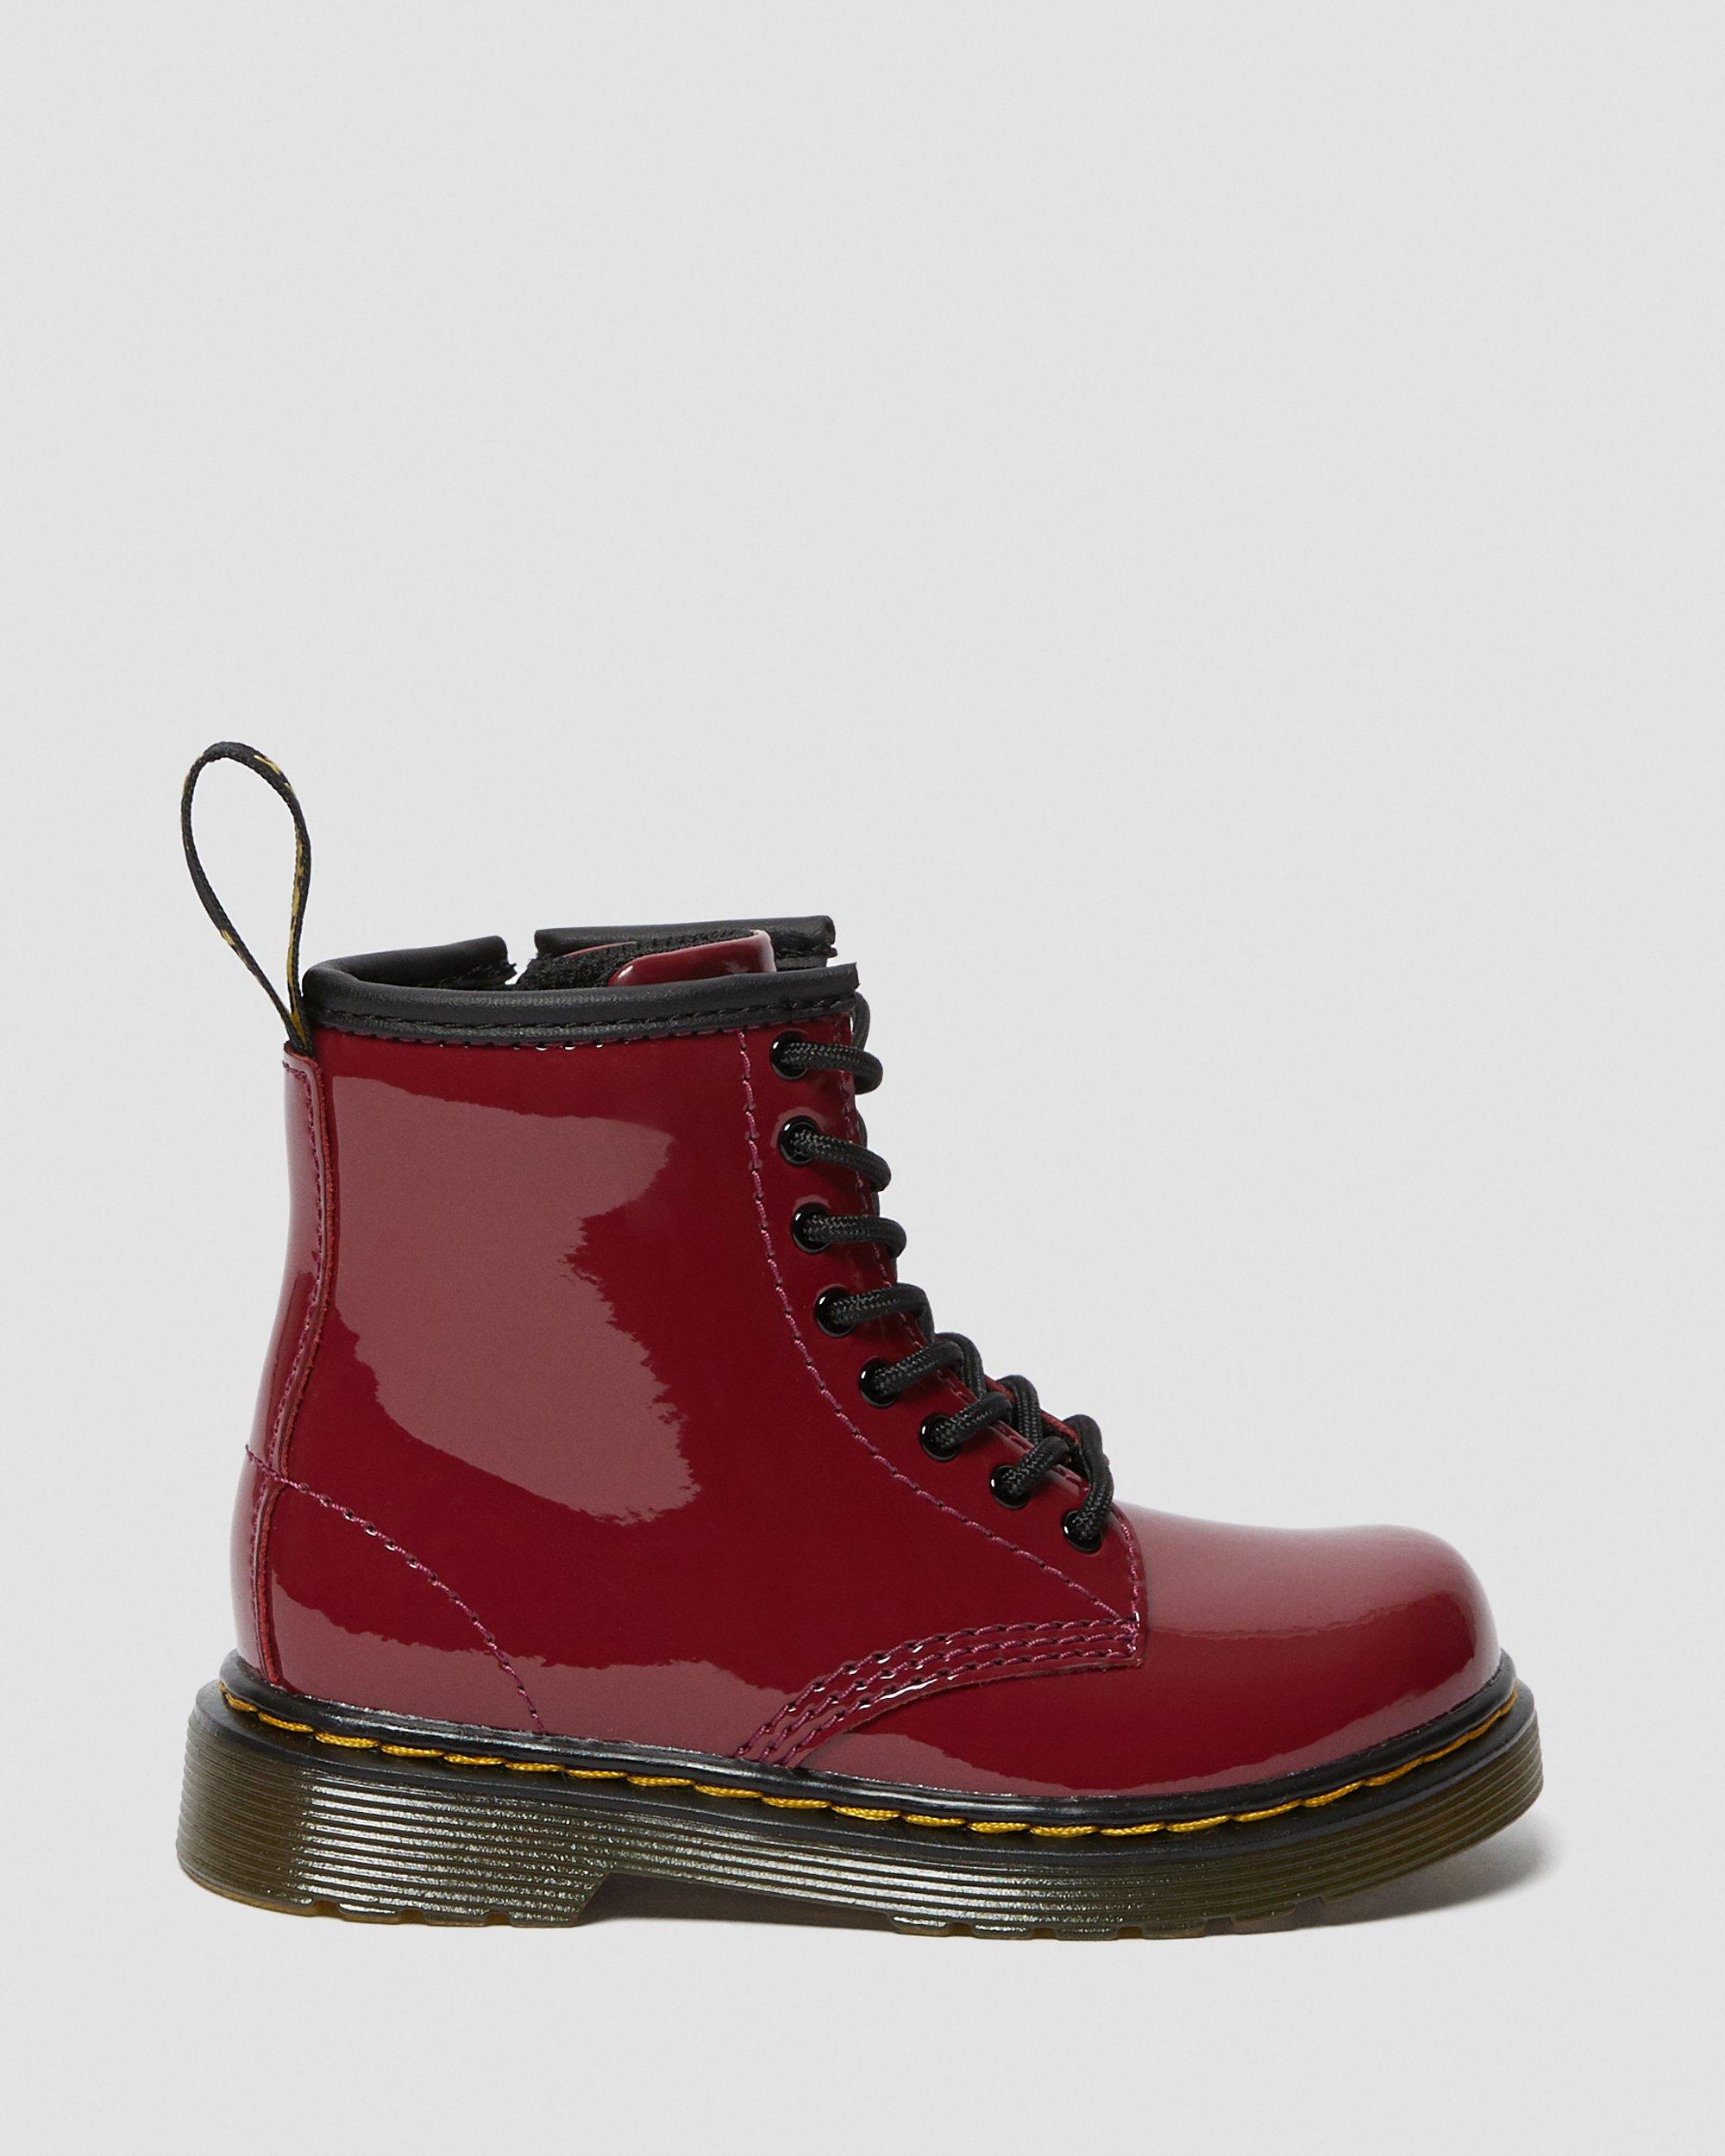 Toddler 1460 Patent Leather Lace Up Boots in Dark Red